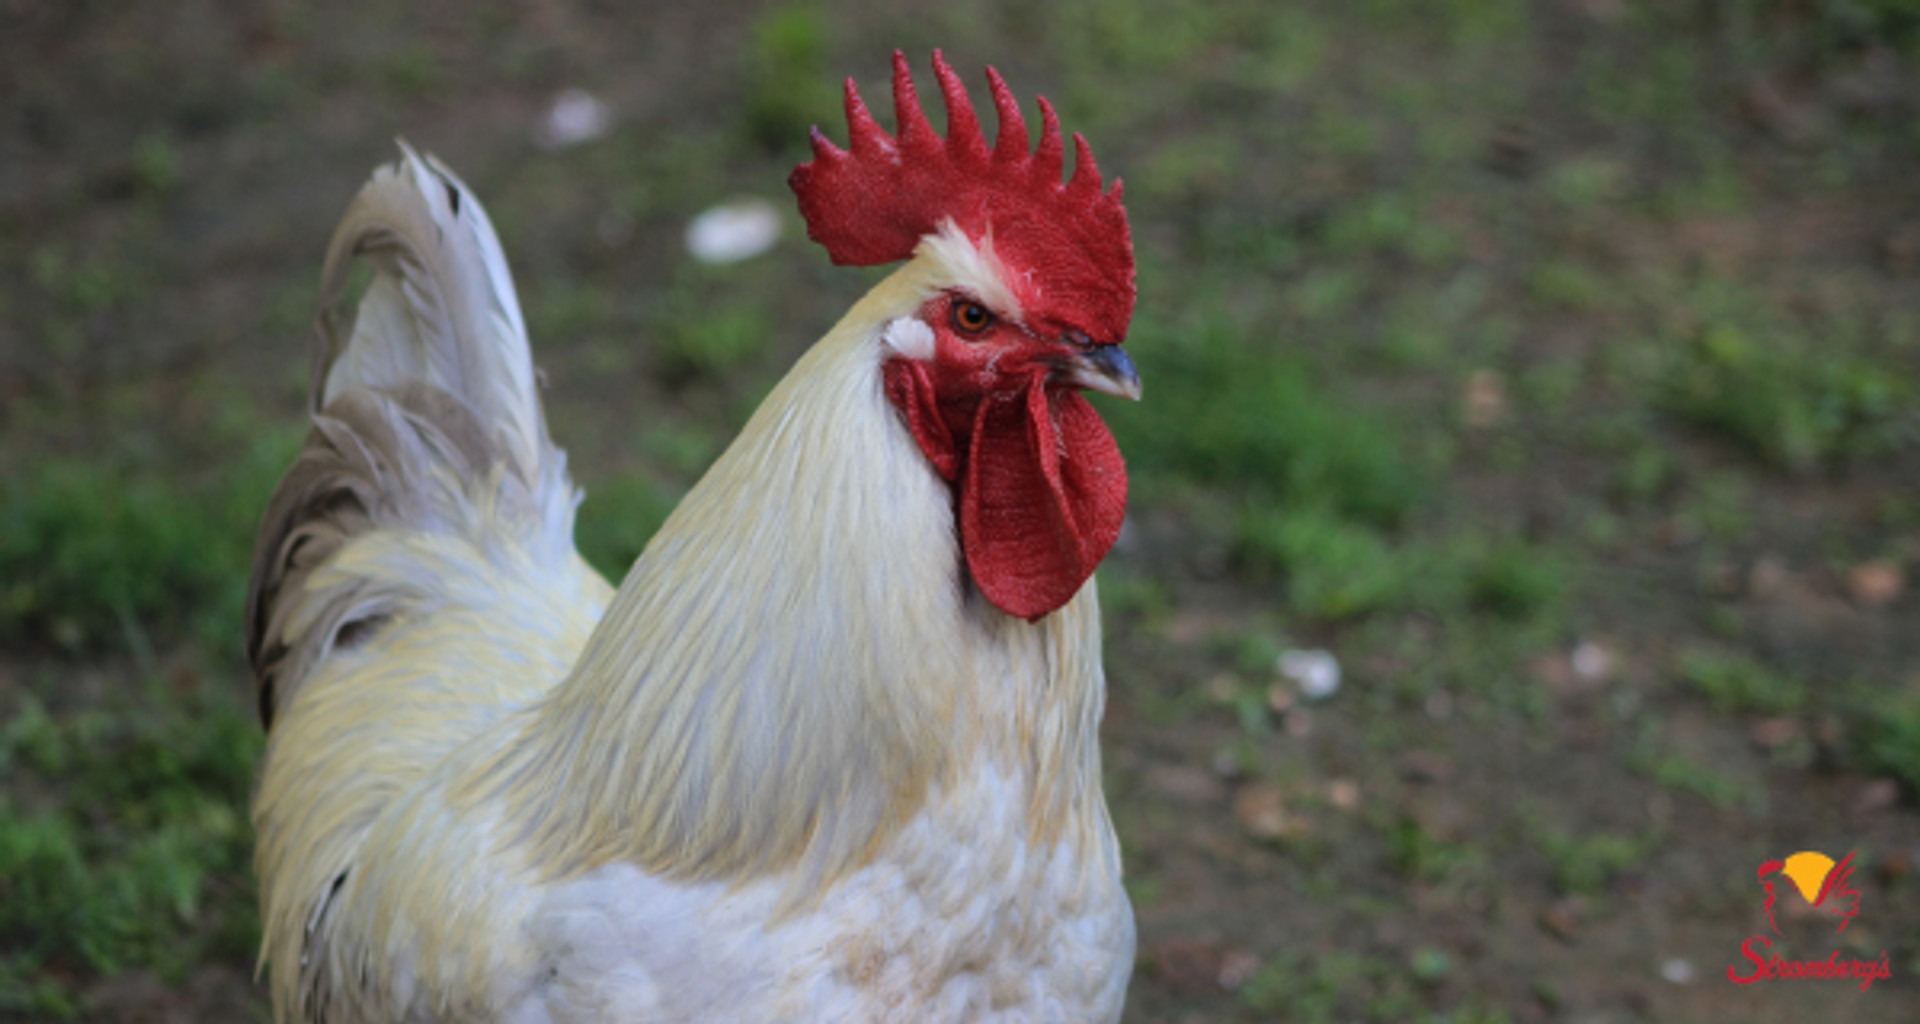 How to Choose the Best Backyard Chicken Breeds For You